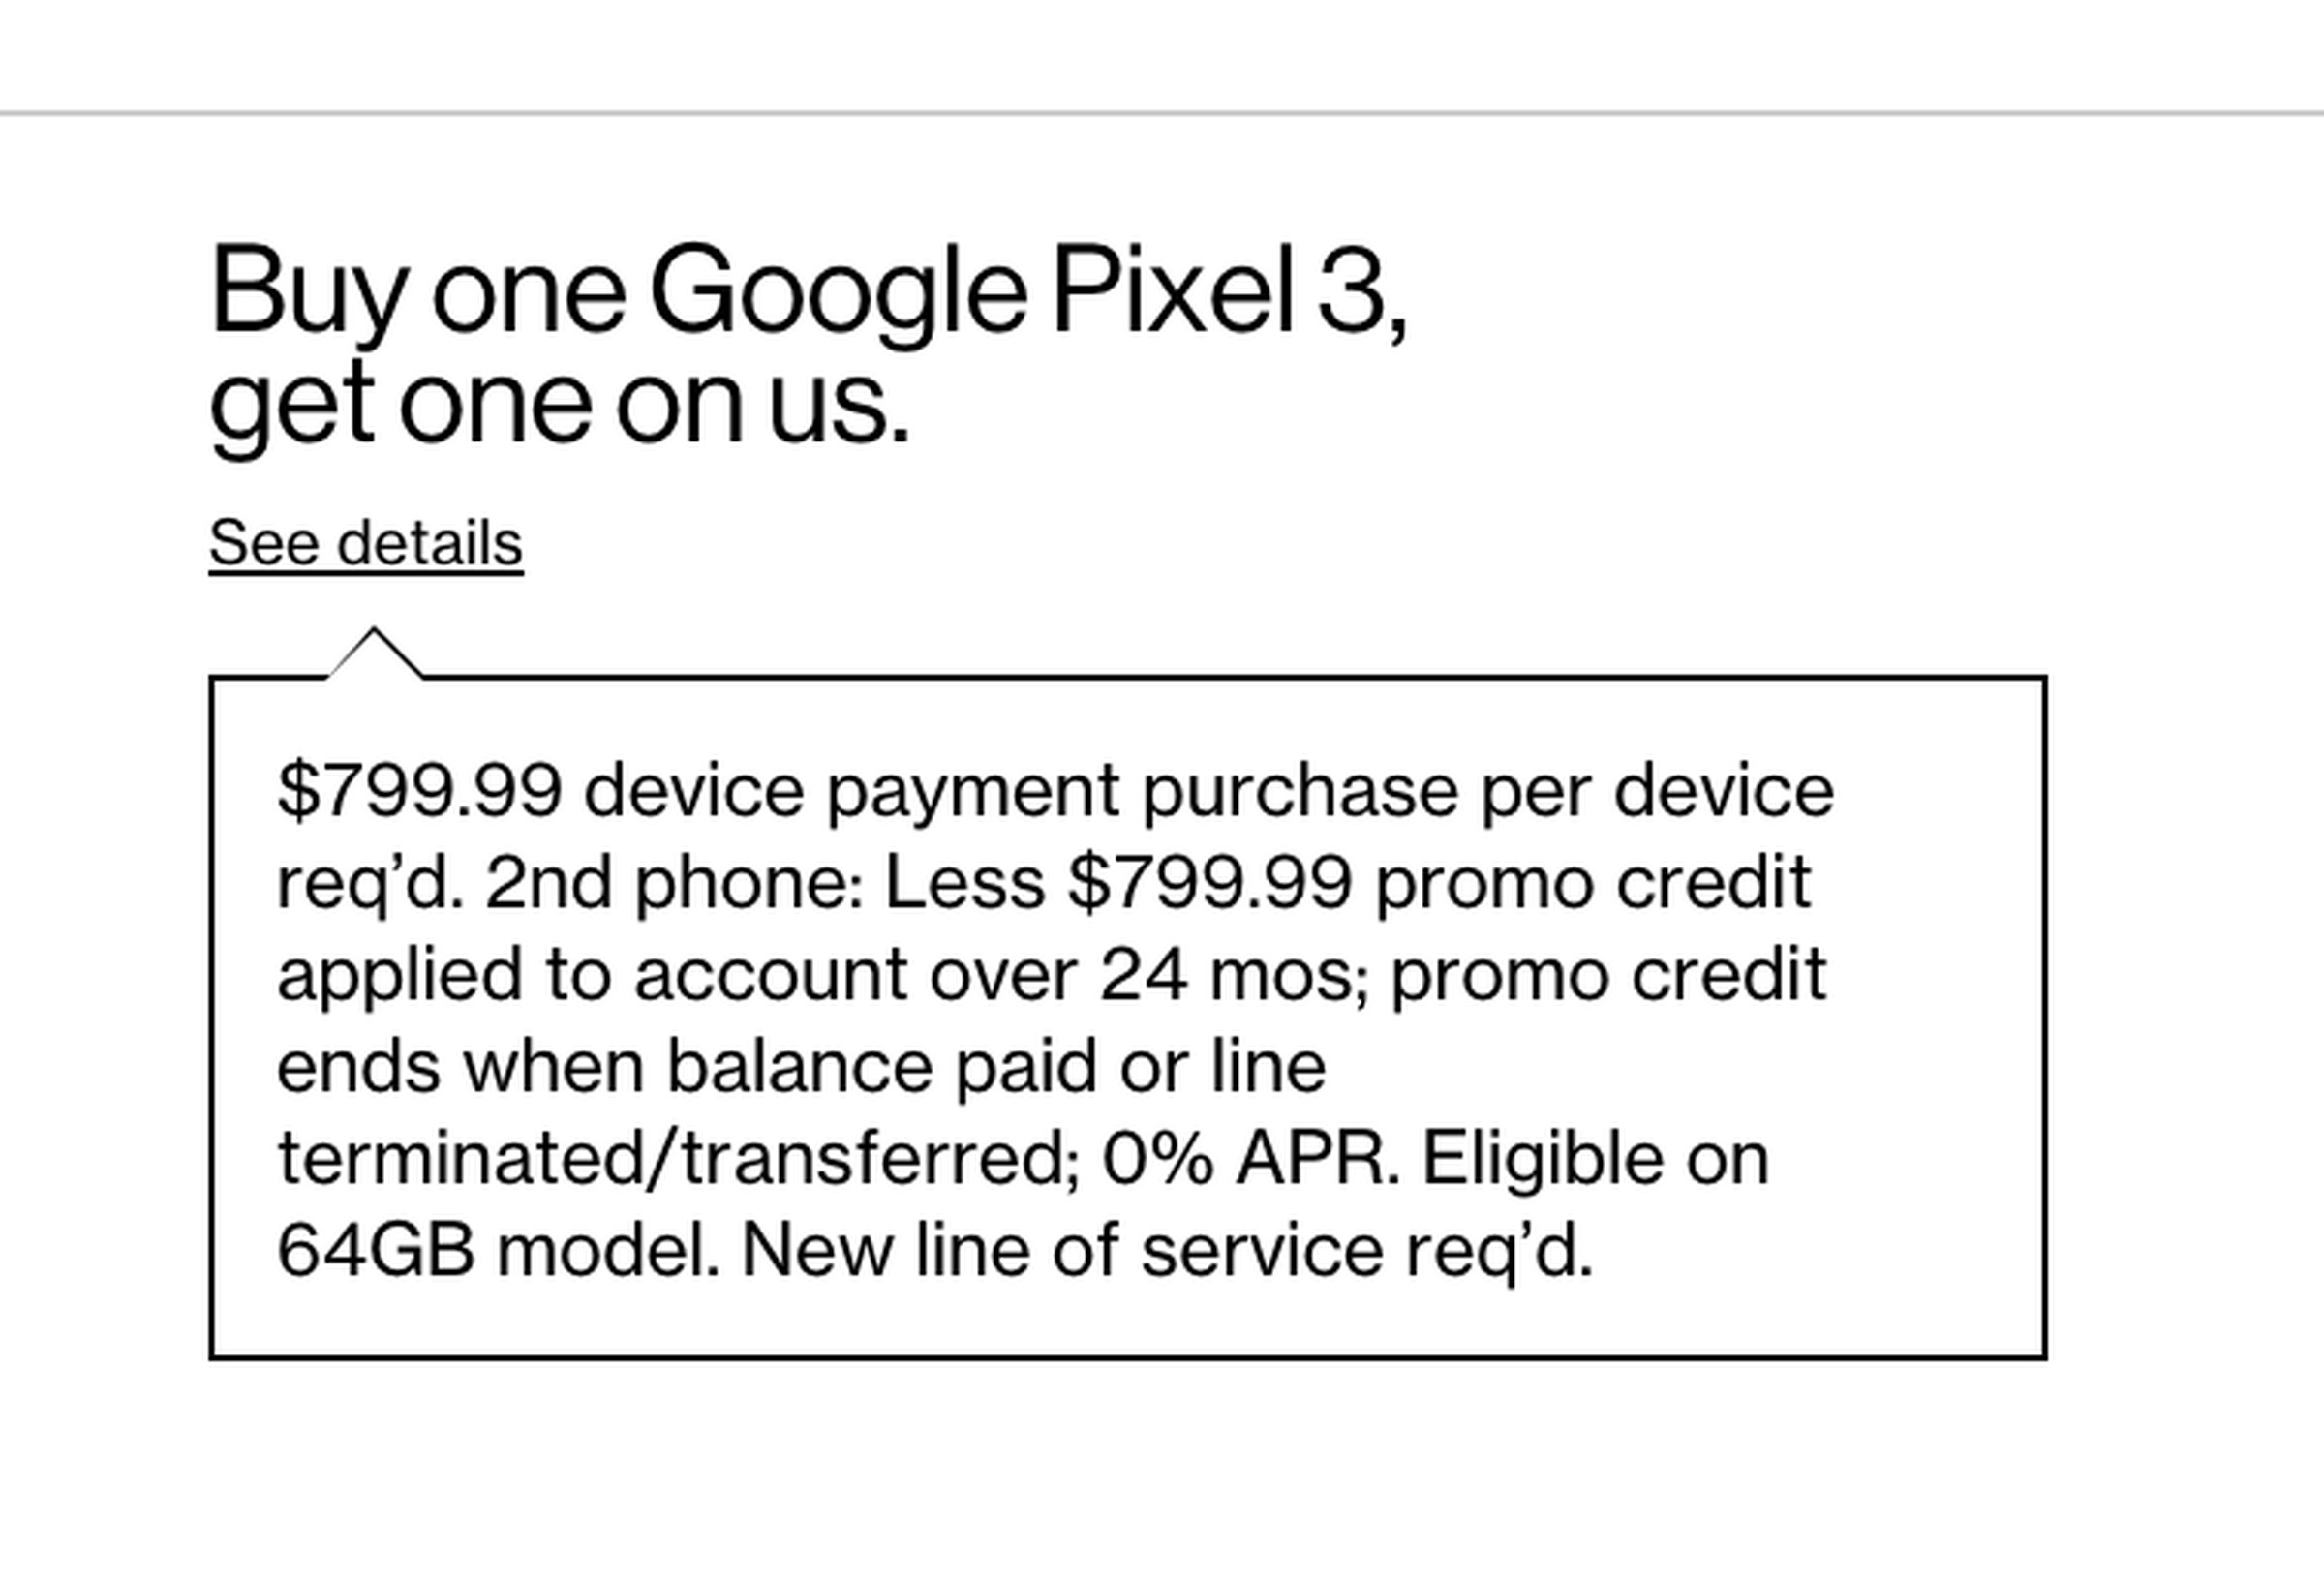 A closer look at the text of the Pixel 3 BoGo deal.